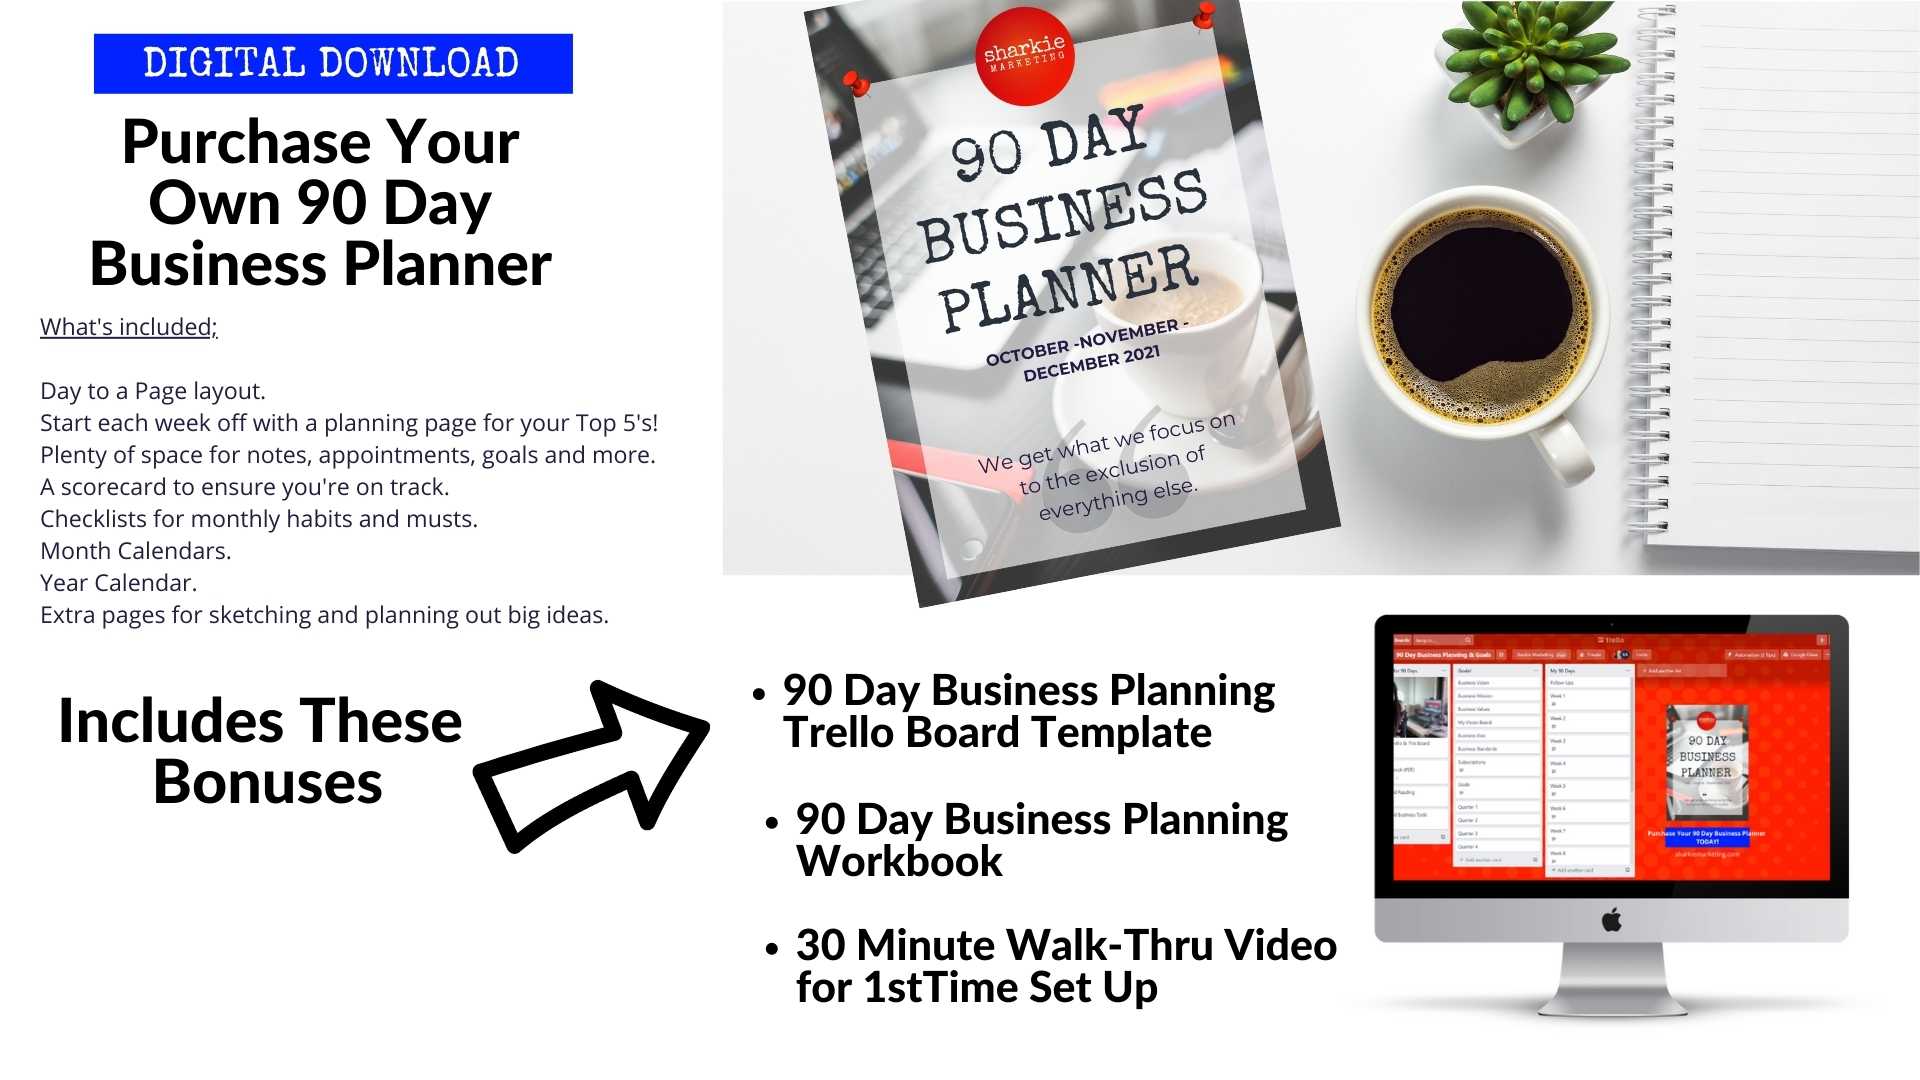 Purchase the 90 Day Business Planner